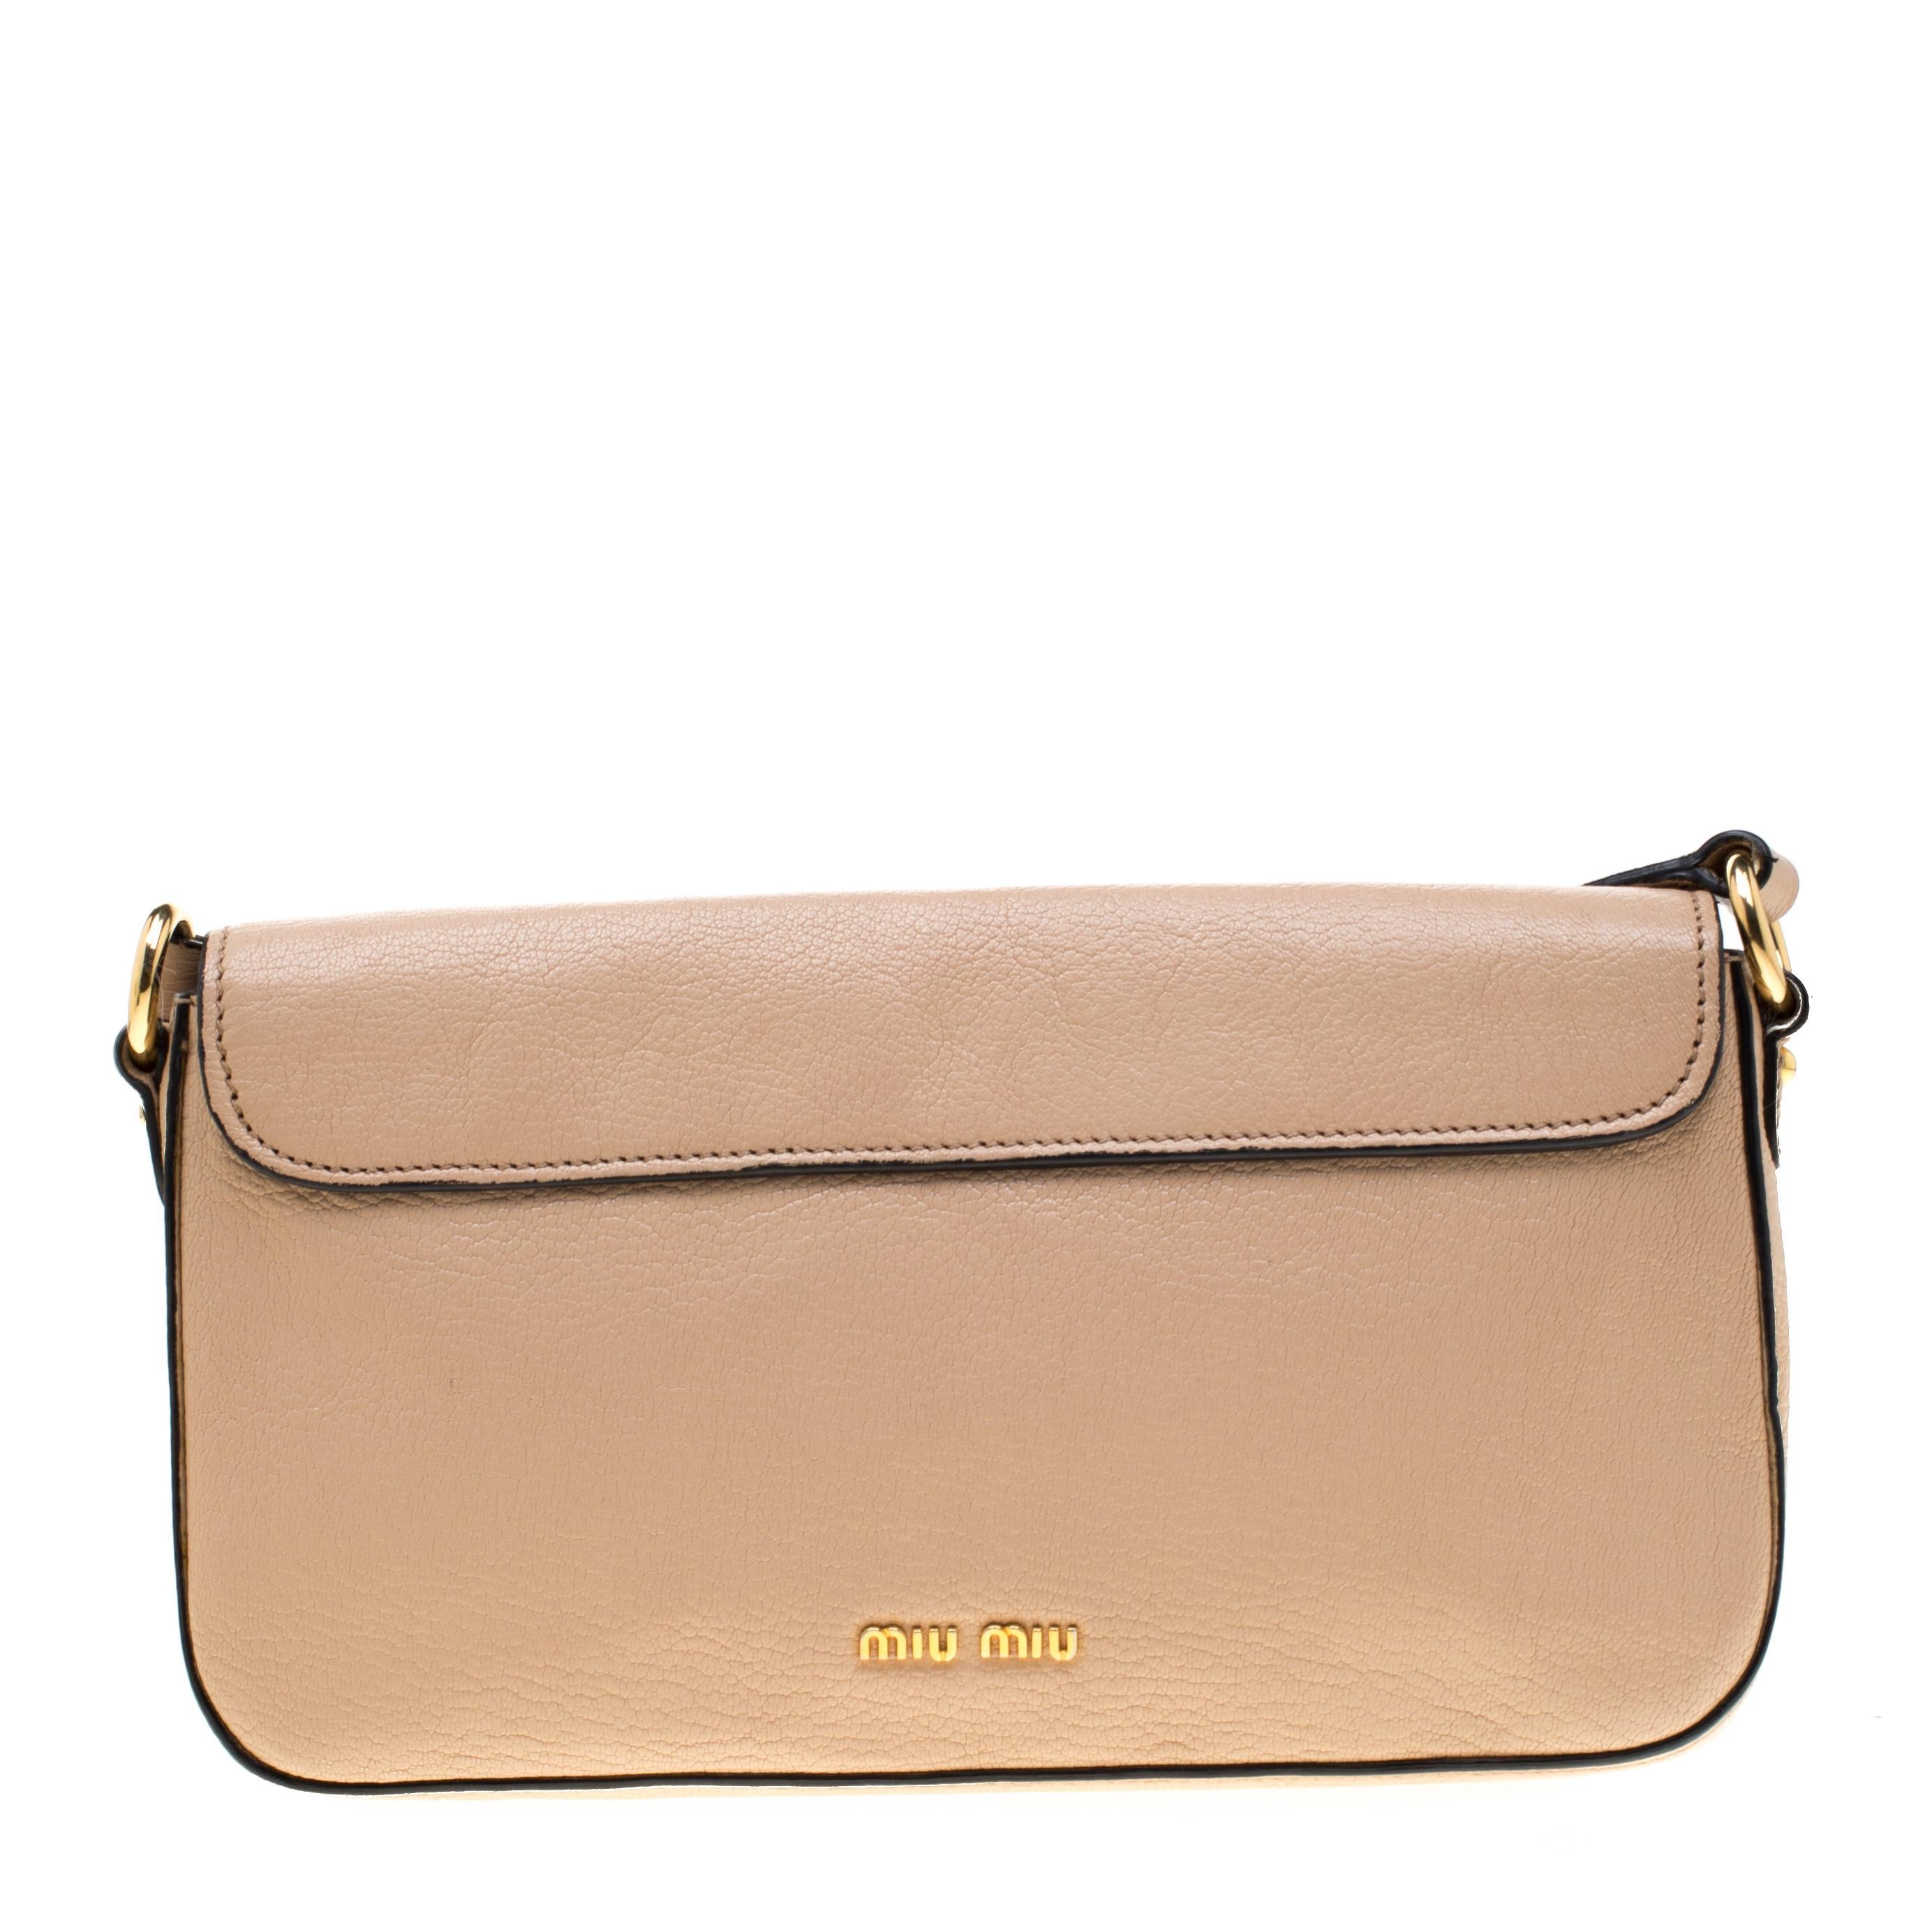 This beautifully crafted leather crossbody bag will surely fetch a lot of compliments for its uber-classy appeal and rich look. It is lined with fabric that allows you to keep your essentials intact. Flaunt this beige Miu Miu bag and let it enhance